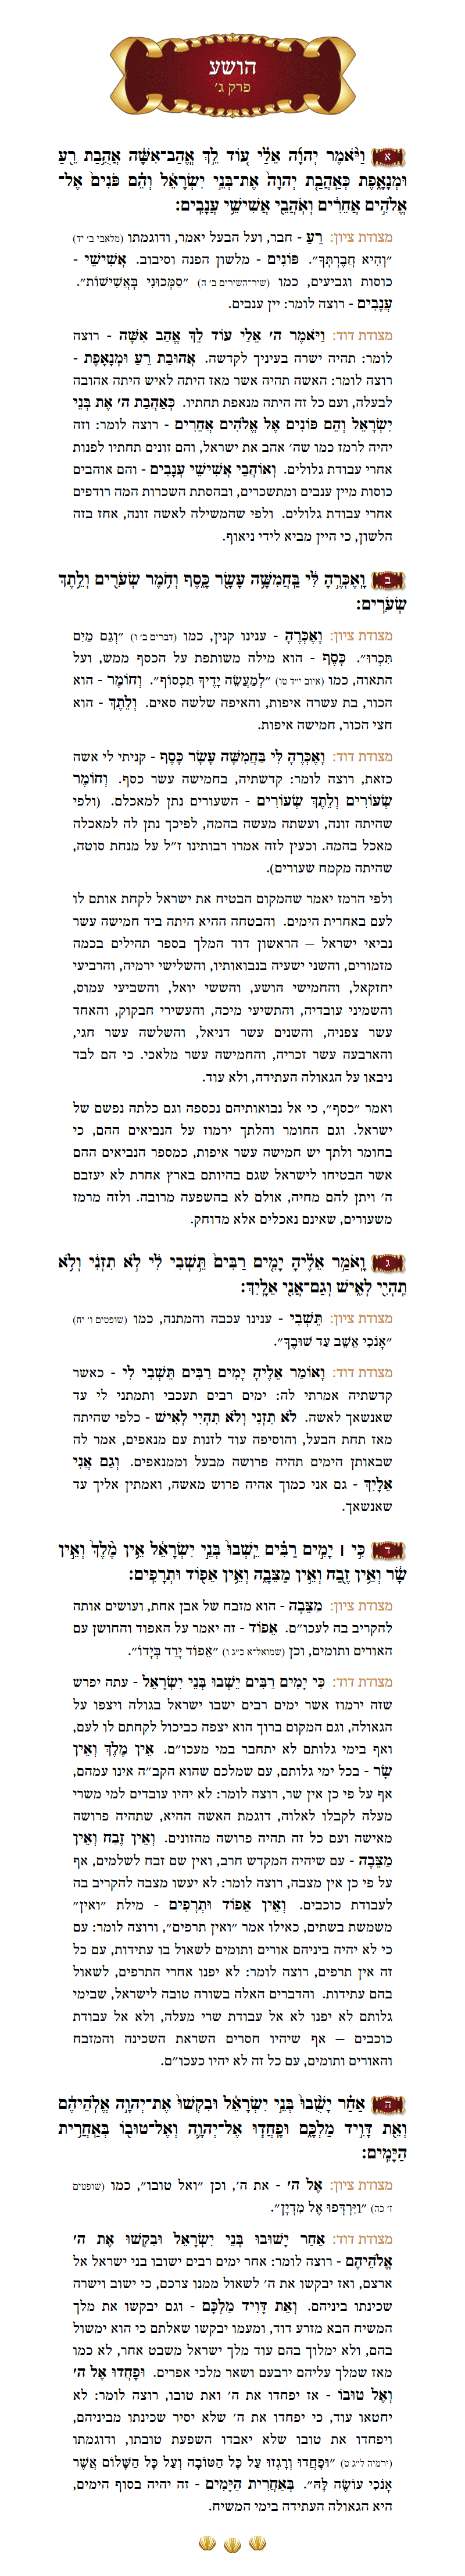 Sefer Hoshea Chapter 3 with commentary